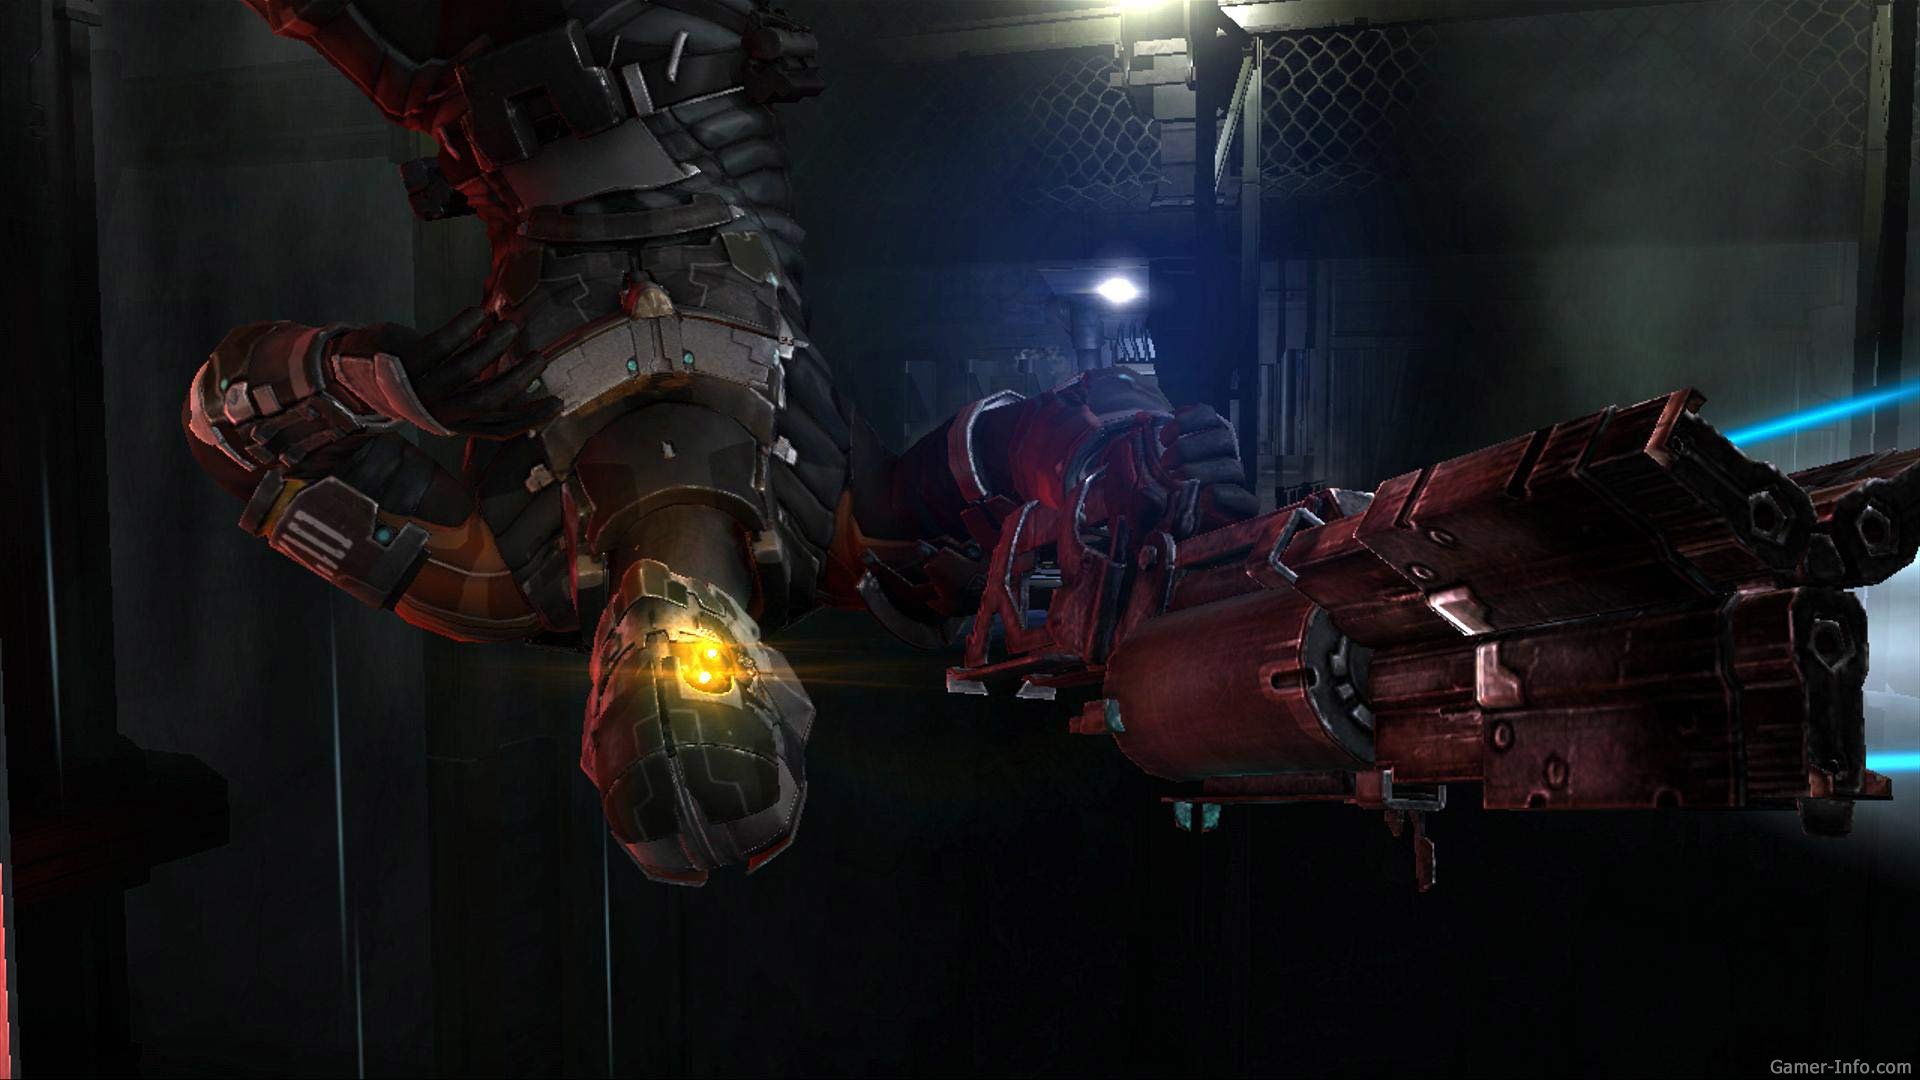 New space 2. Dead Space 2 DLC. Dead Space 2 Severed. Dead Space 2: Severed (DLC 2011). Dead Space 2 DLC Severed.